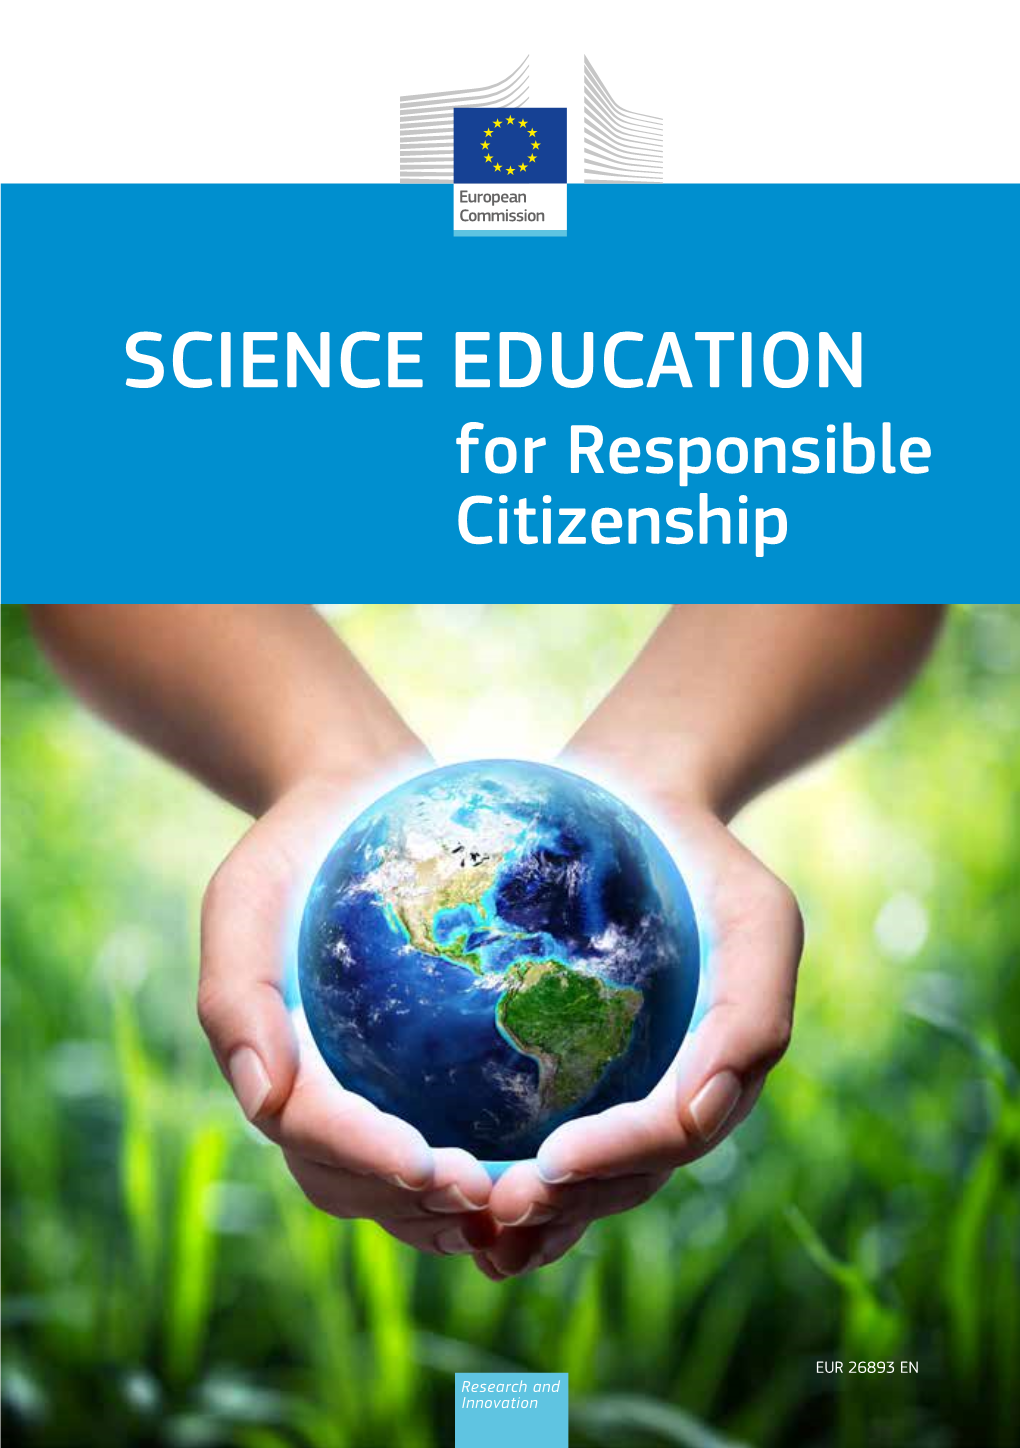 SCIENCE EDUCATION for Responsible Citizenship